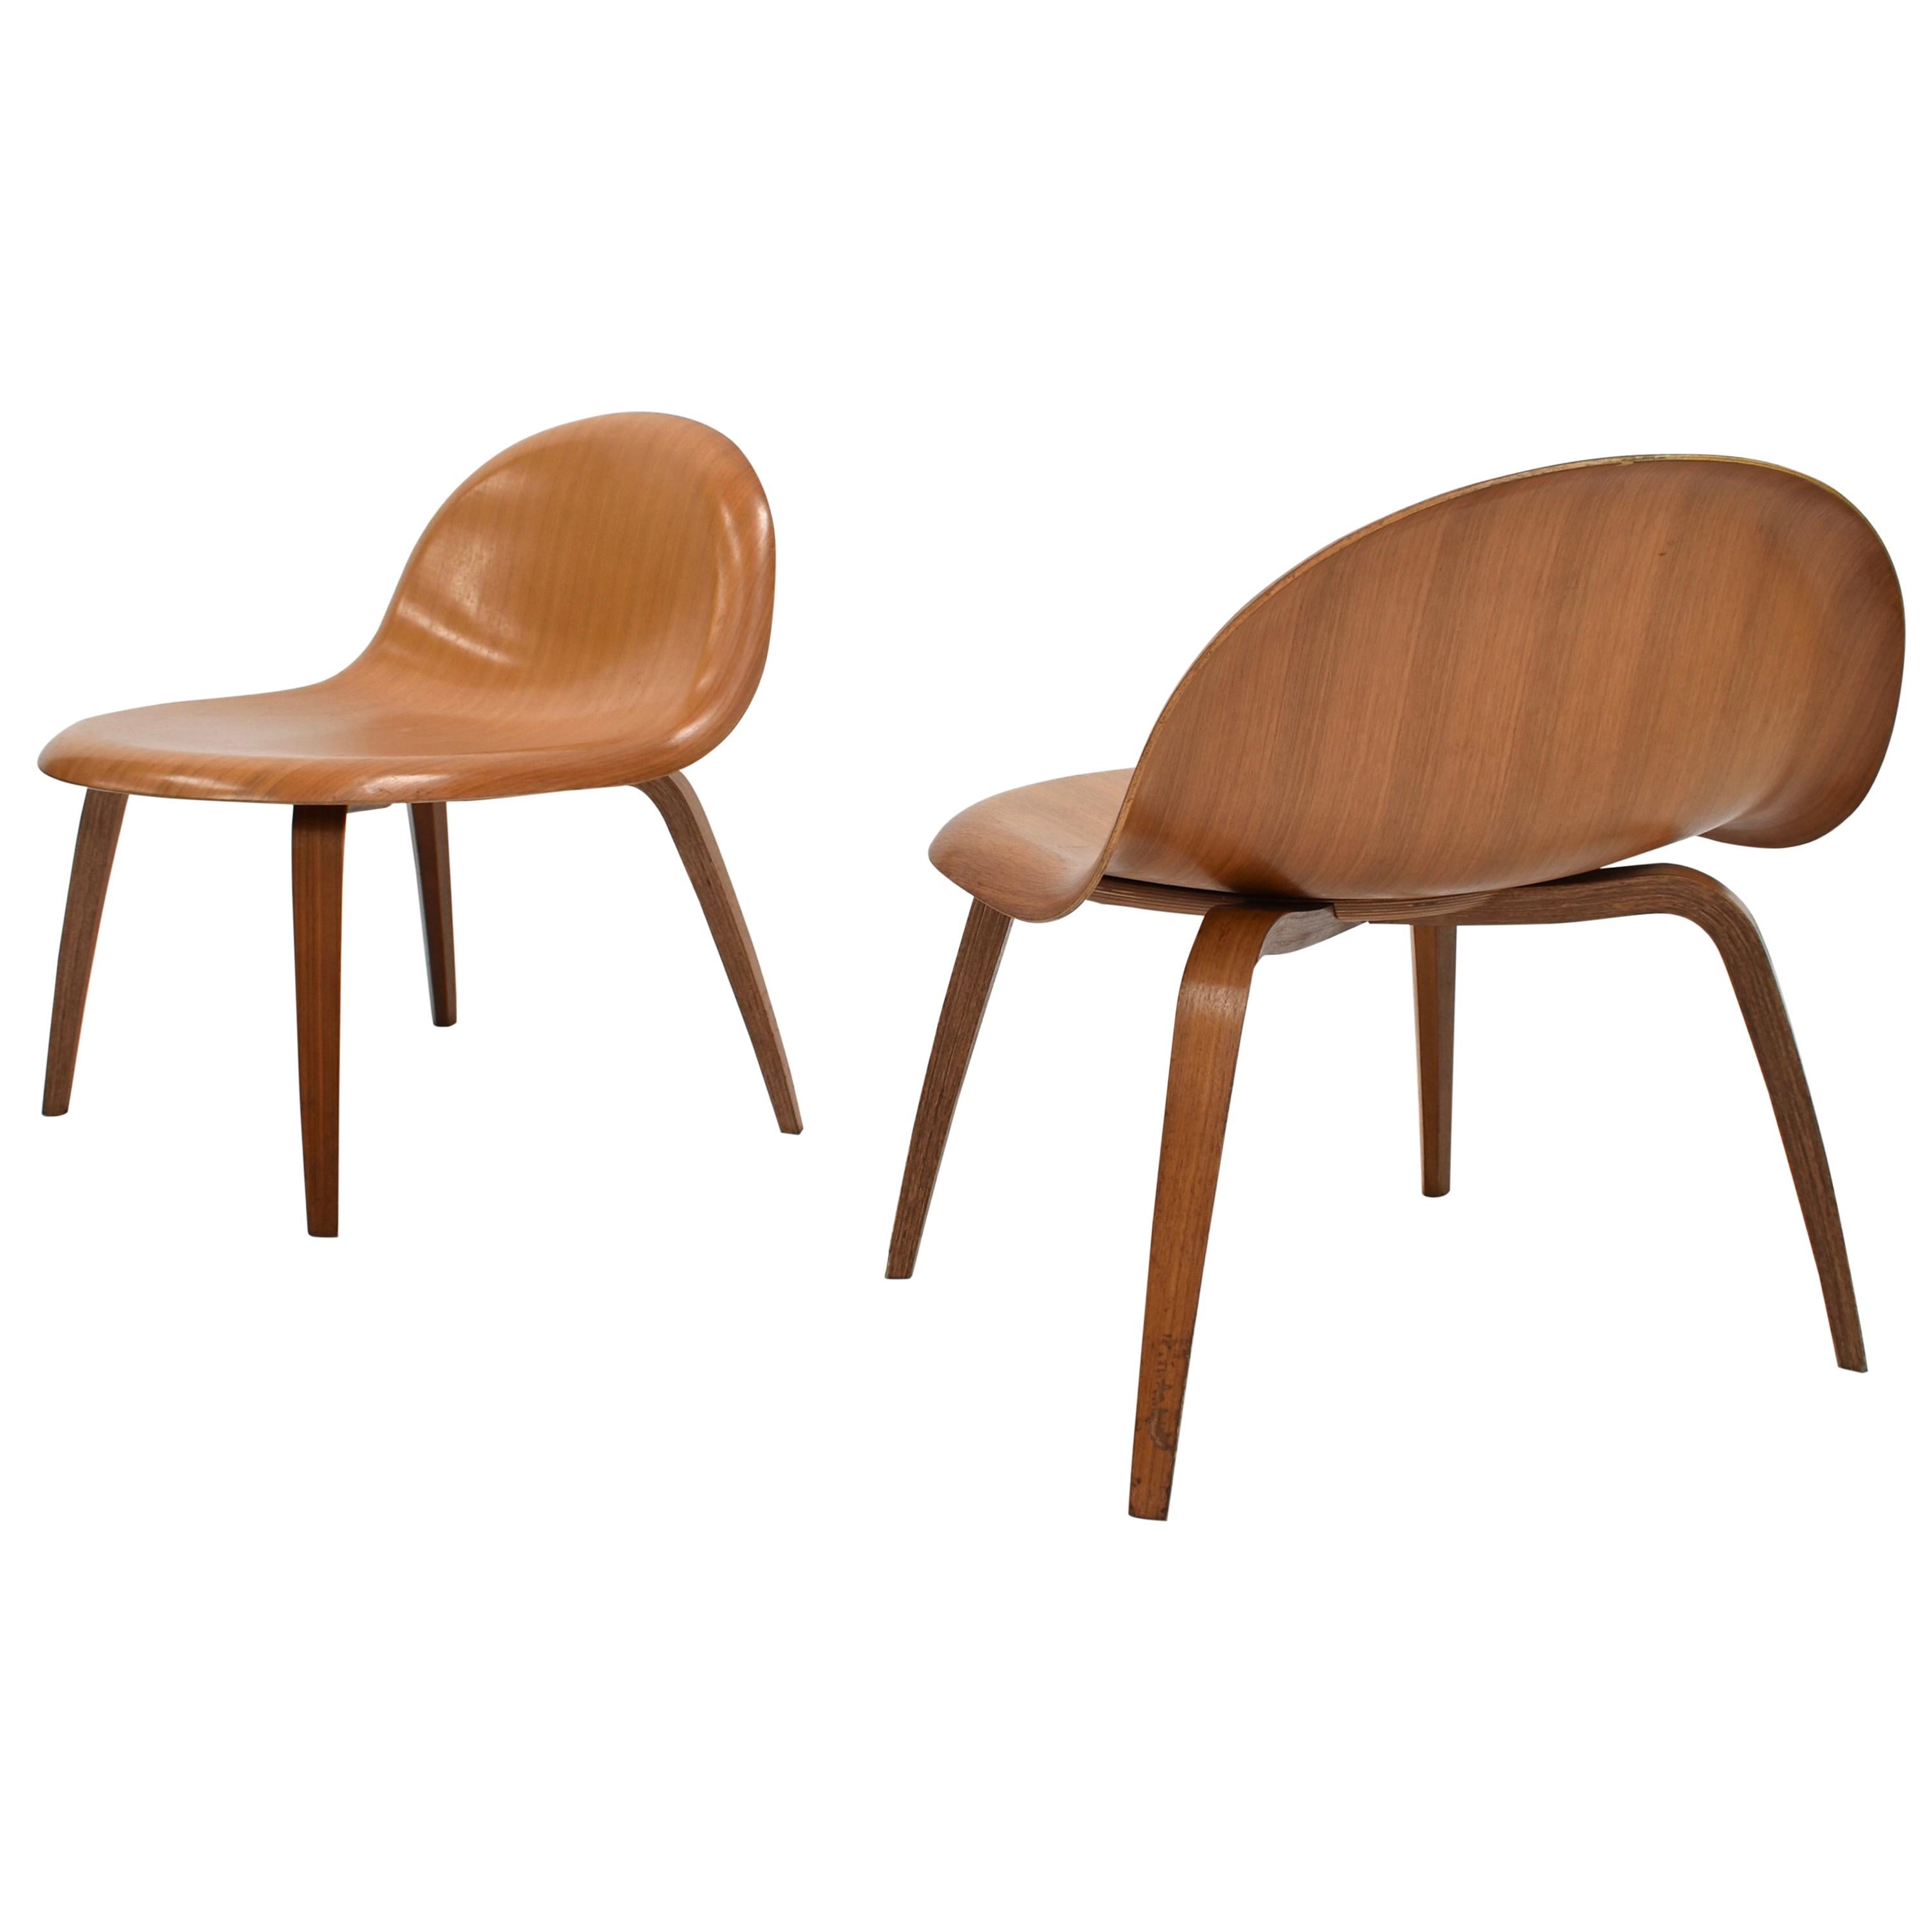 Molded Plywood Lounge Chairs by Boris Berlin and Poul Christiansen for Komplot